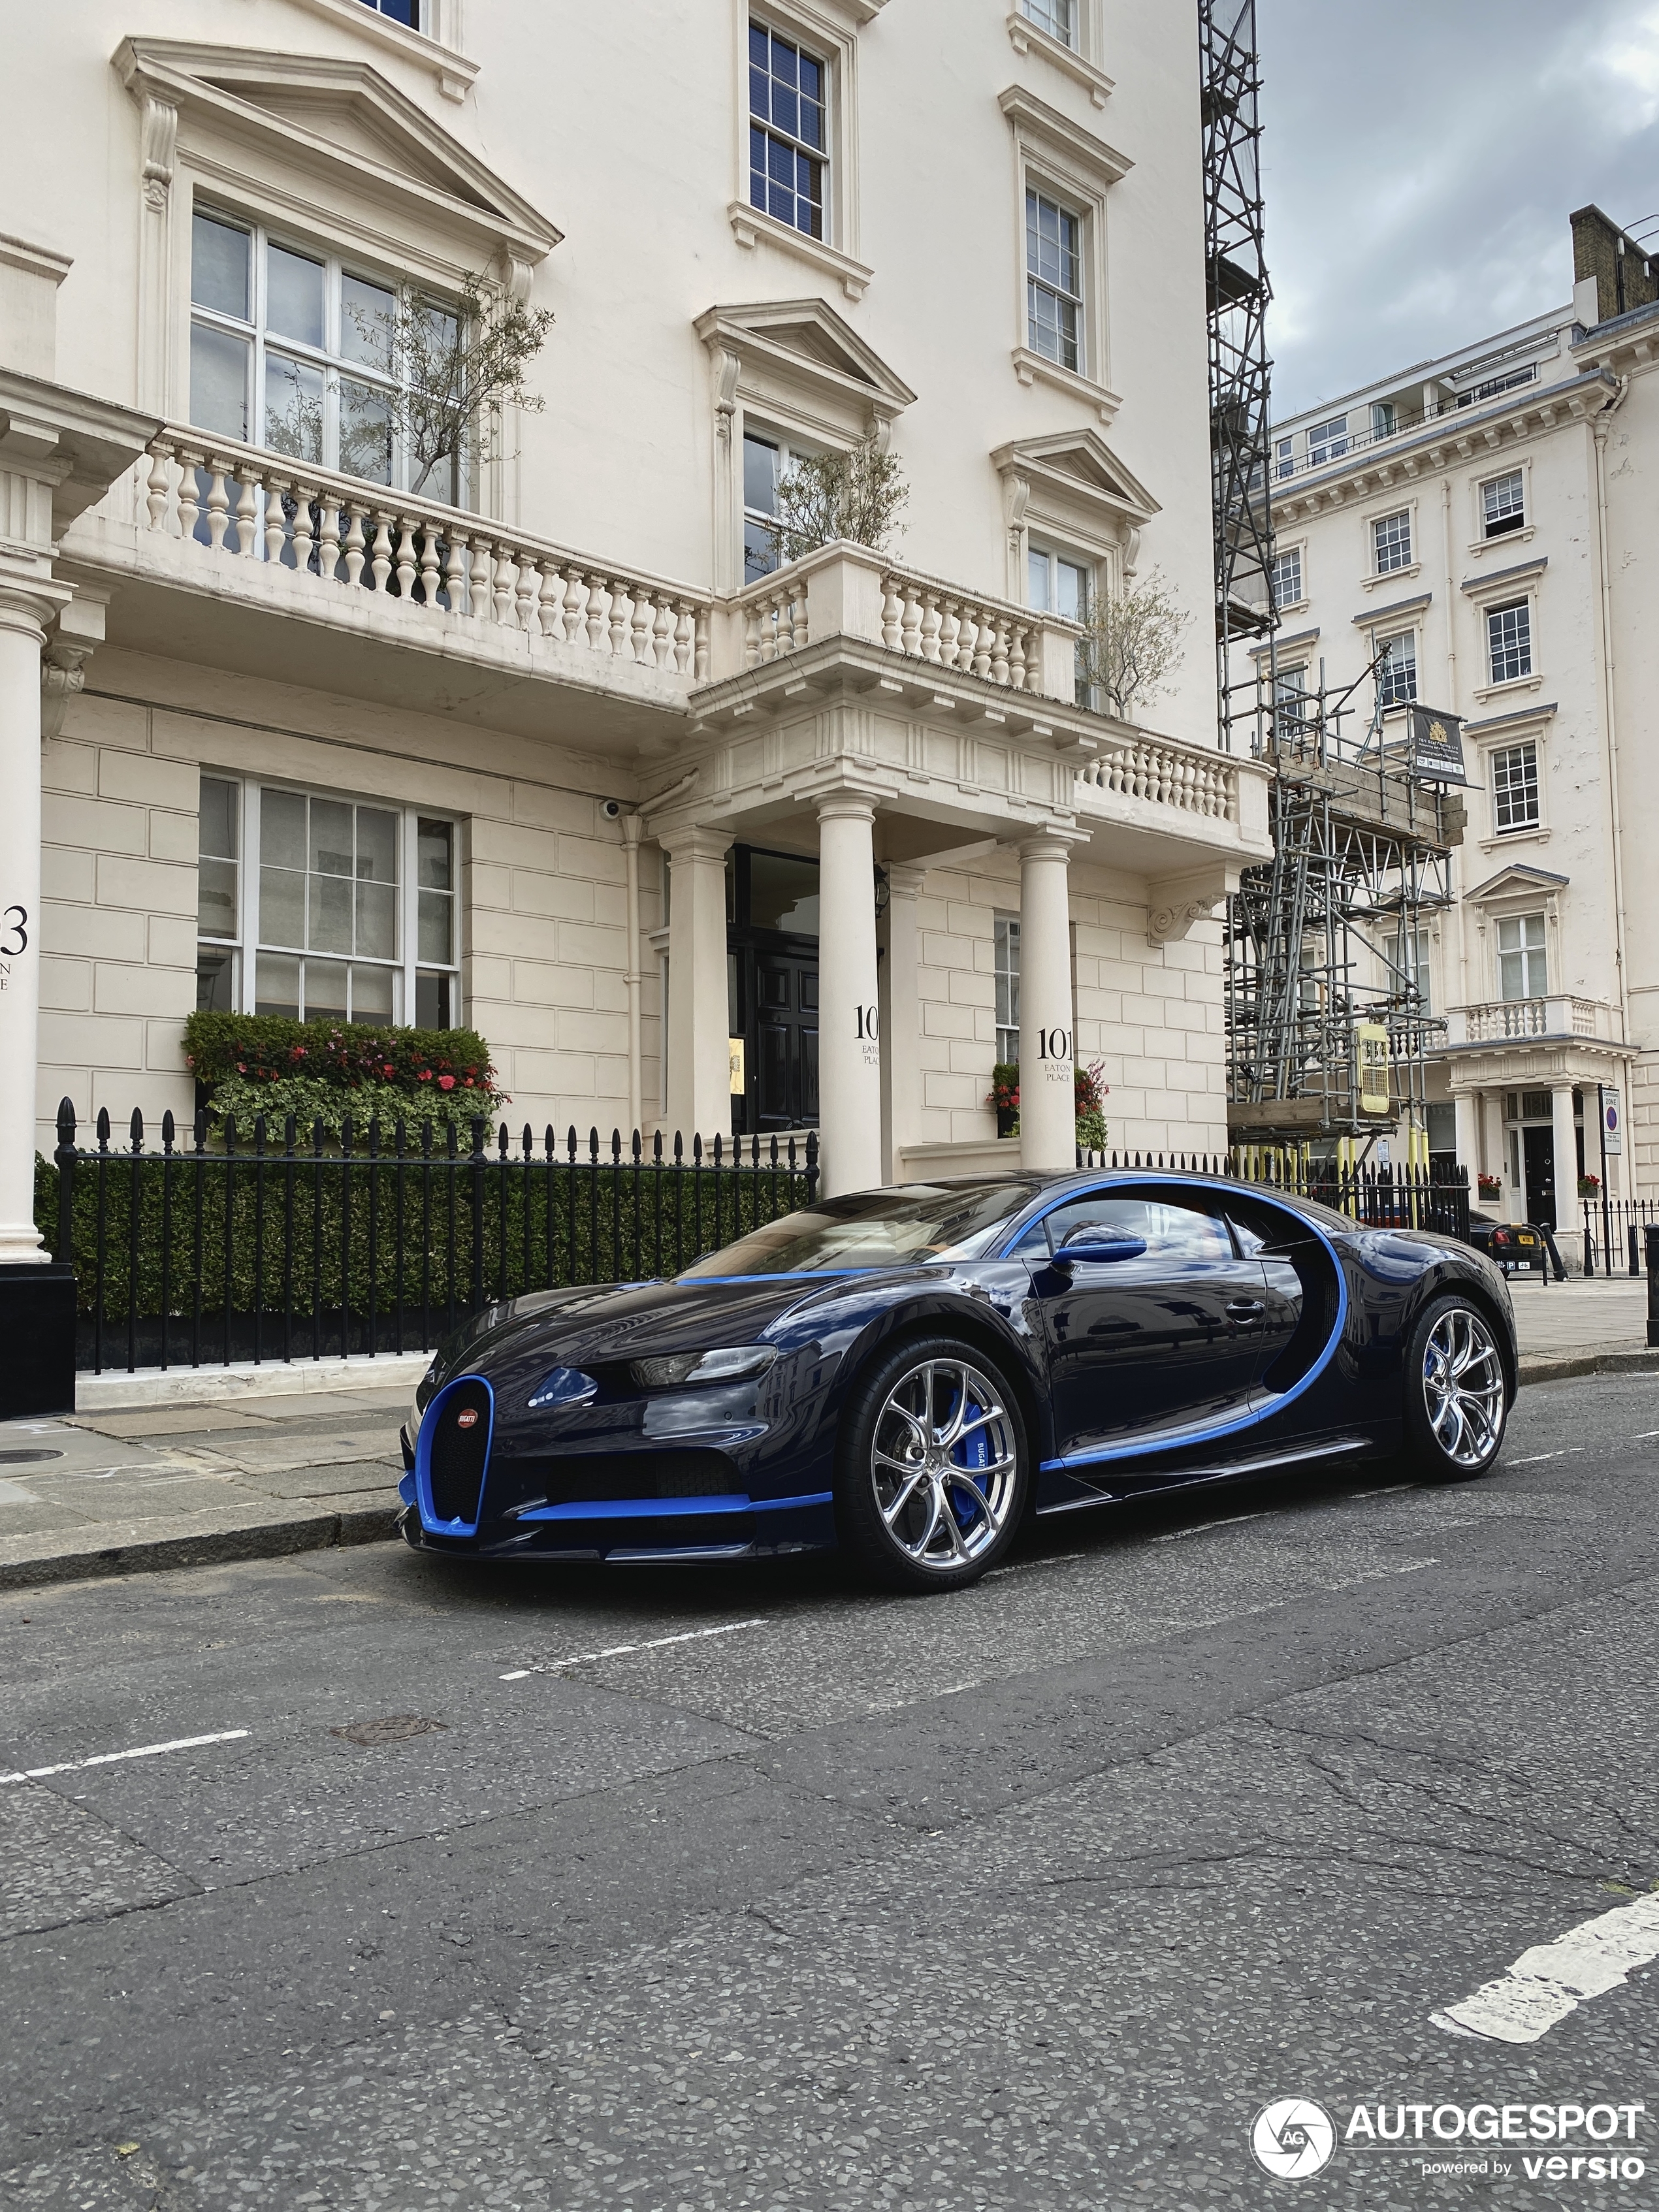 A new Chiron emerges in London